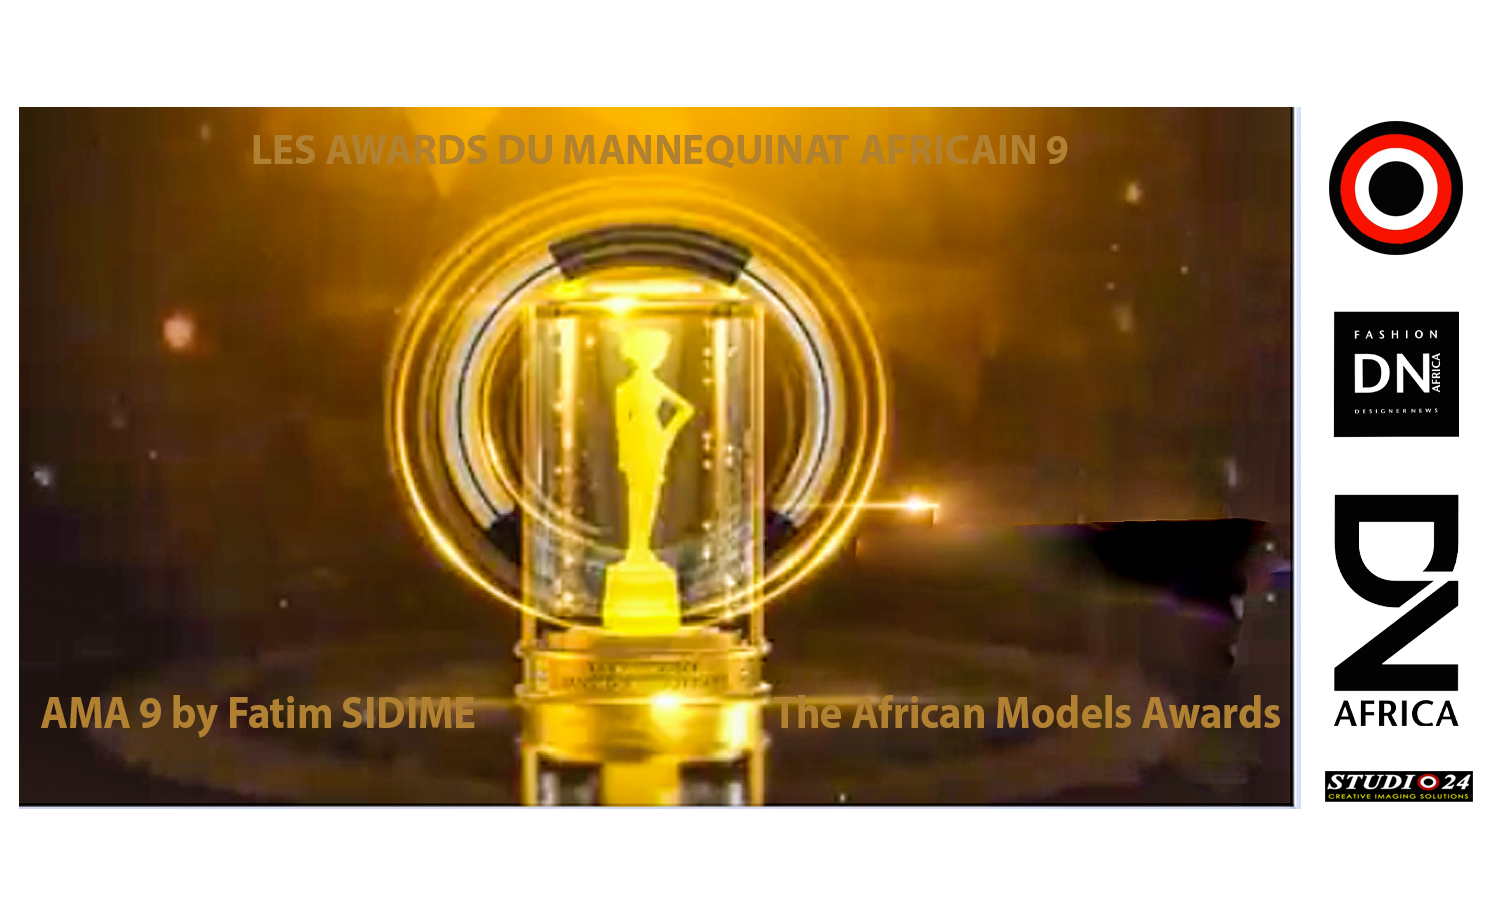 AFRICAN FASHION STYLE MAGAZINE - AMA 9 by Fatim SIDIME - LES-AWARDS-DU-MANNEQUINNAT-AFRICAIN-EDITION-9-2019 - Photographer DAN NGU - Official Media Partner DN AFRICA - STUDIO 24 NIGERIA - STUDIO 24 INTERNATIONAL - Ifeanyi Christopher Oputa MD AND CEO OF COLVI LIMITED AND STUDIO 24 - CHEVEUX CHERIE and CHEVEUX CHERIE STUDIO BY MARIEME DUBOZ- Fashion Editor Nahomie NOOR COULIBALY